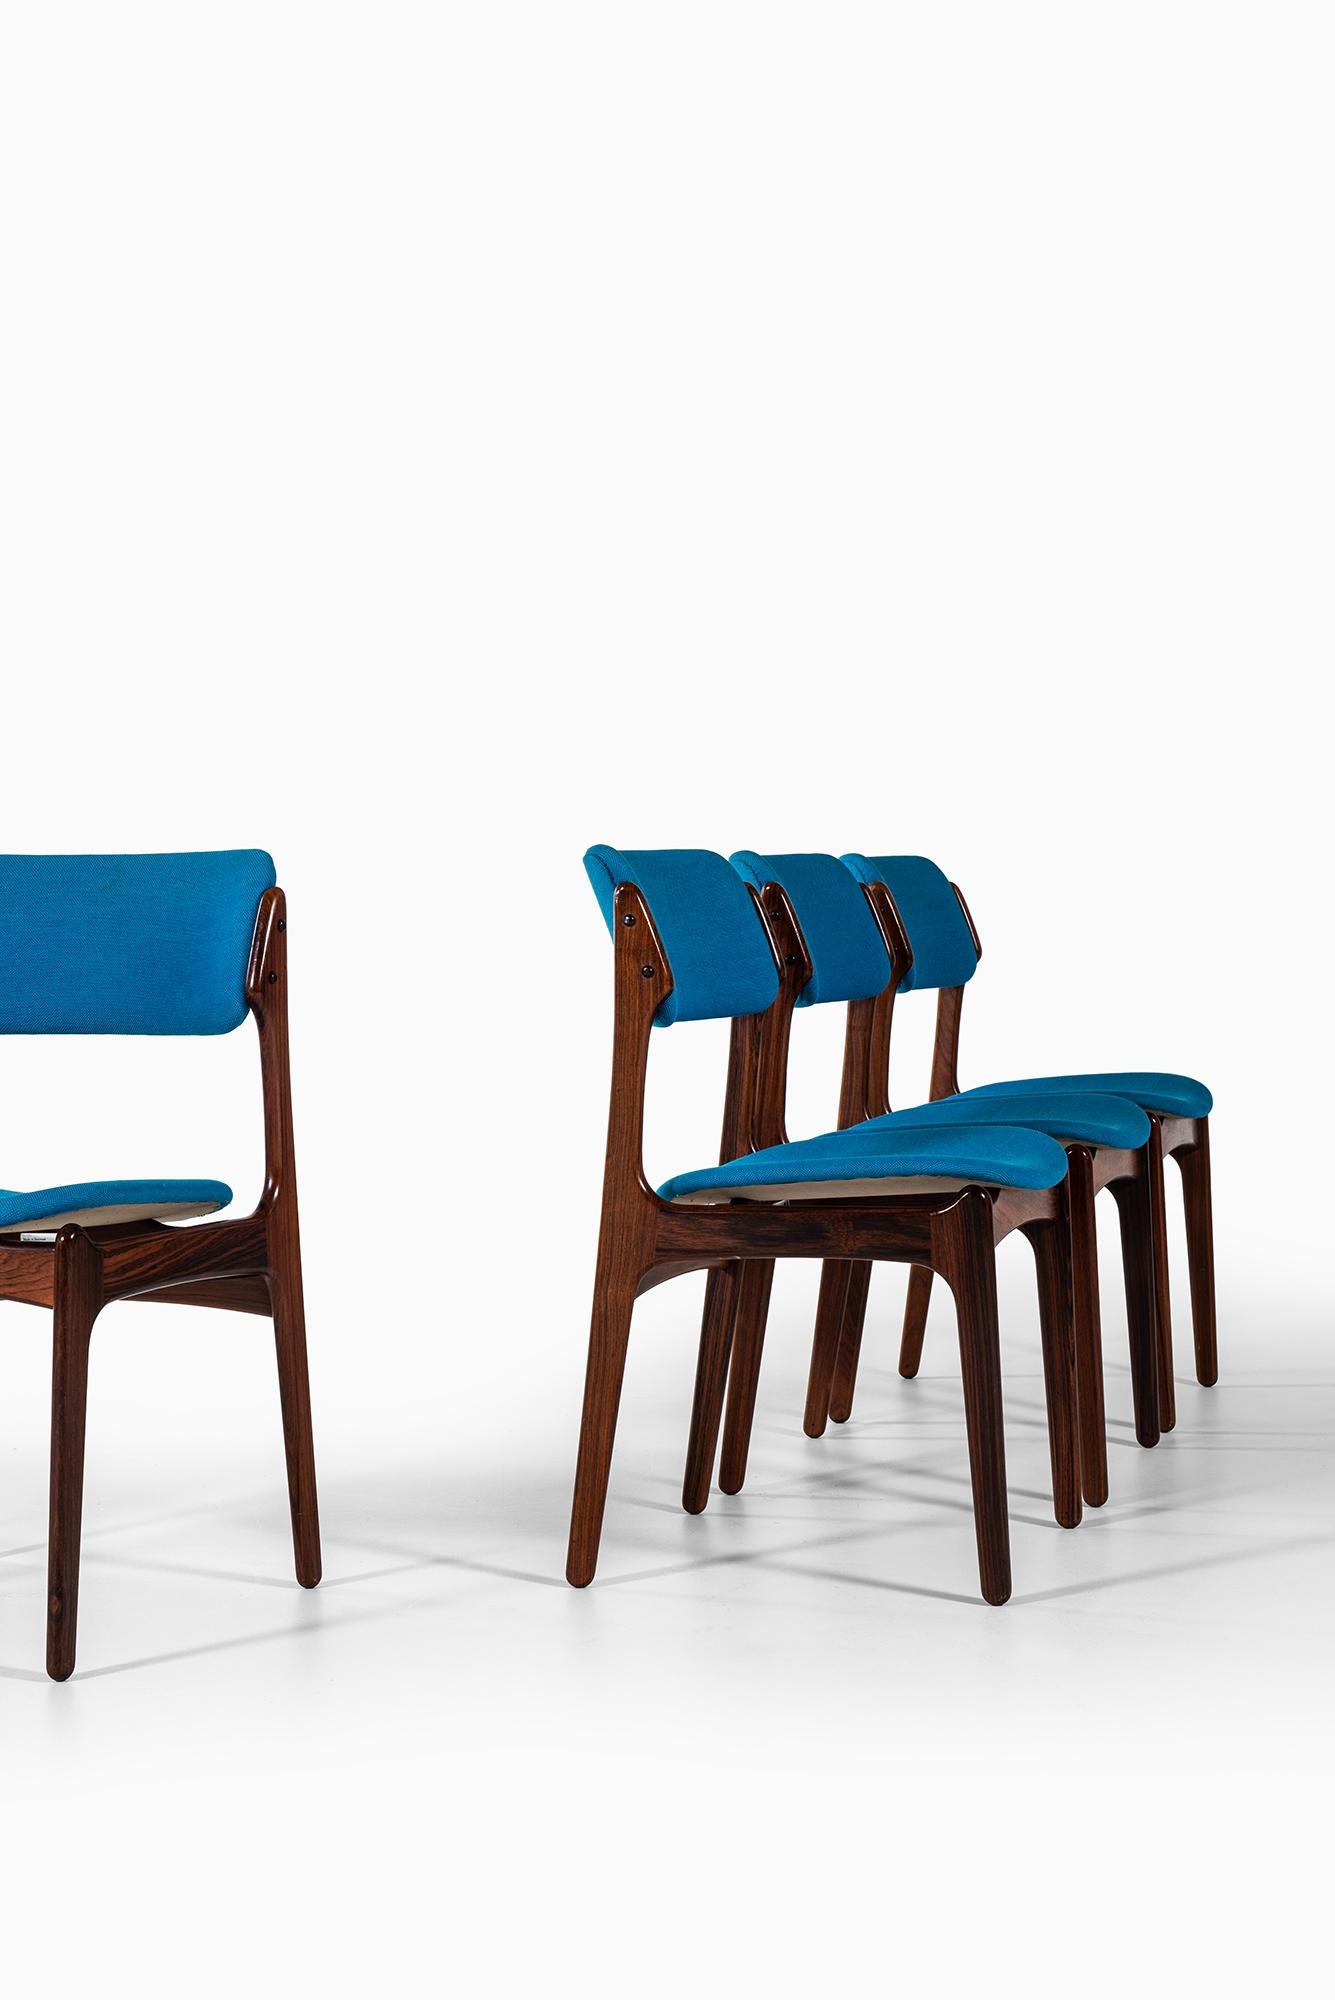 Rare set of six dining chairs model OD-49 designed by Erik Buck. Produced by Oddense maskinsnedkeri A/S in Denmark.